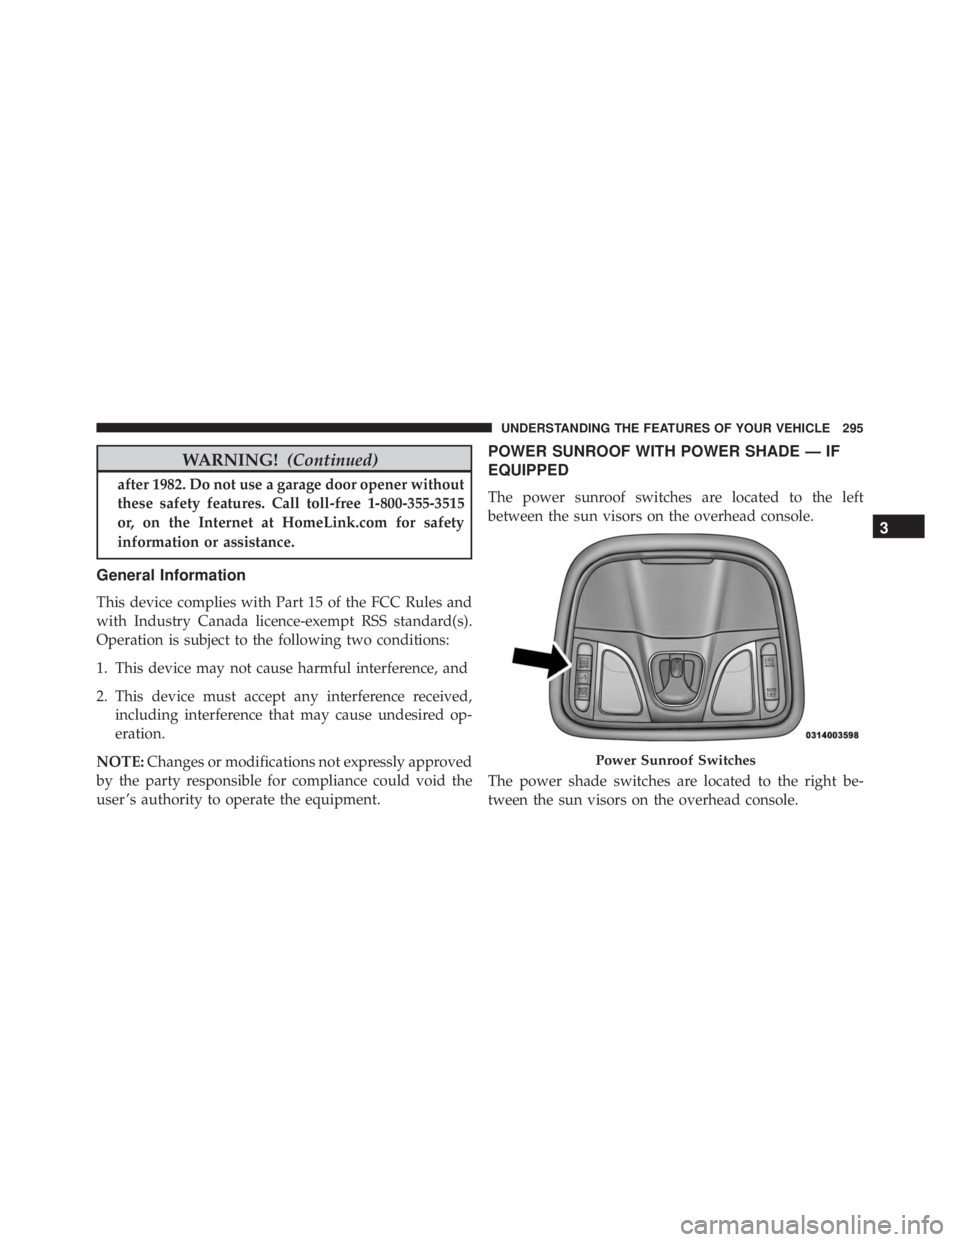 JEEP CHEROKEE TRAILHAWK 2016  Owners Manual WARNING!(Continued)
after 1982. Do not use a garage door opener without
these safety features. Call toll-free 1-800-355-3515
or, on the Internet at HomeLink.com for safety
information or assistance.
G